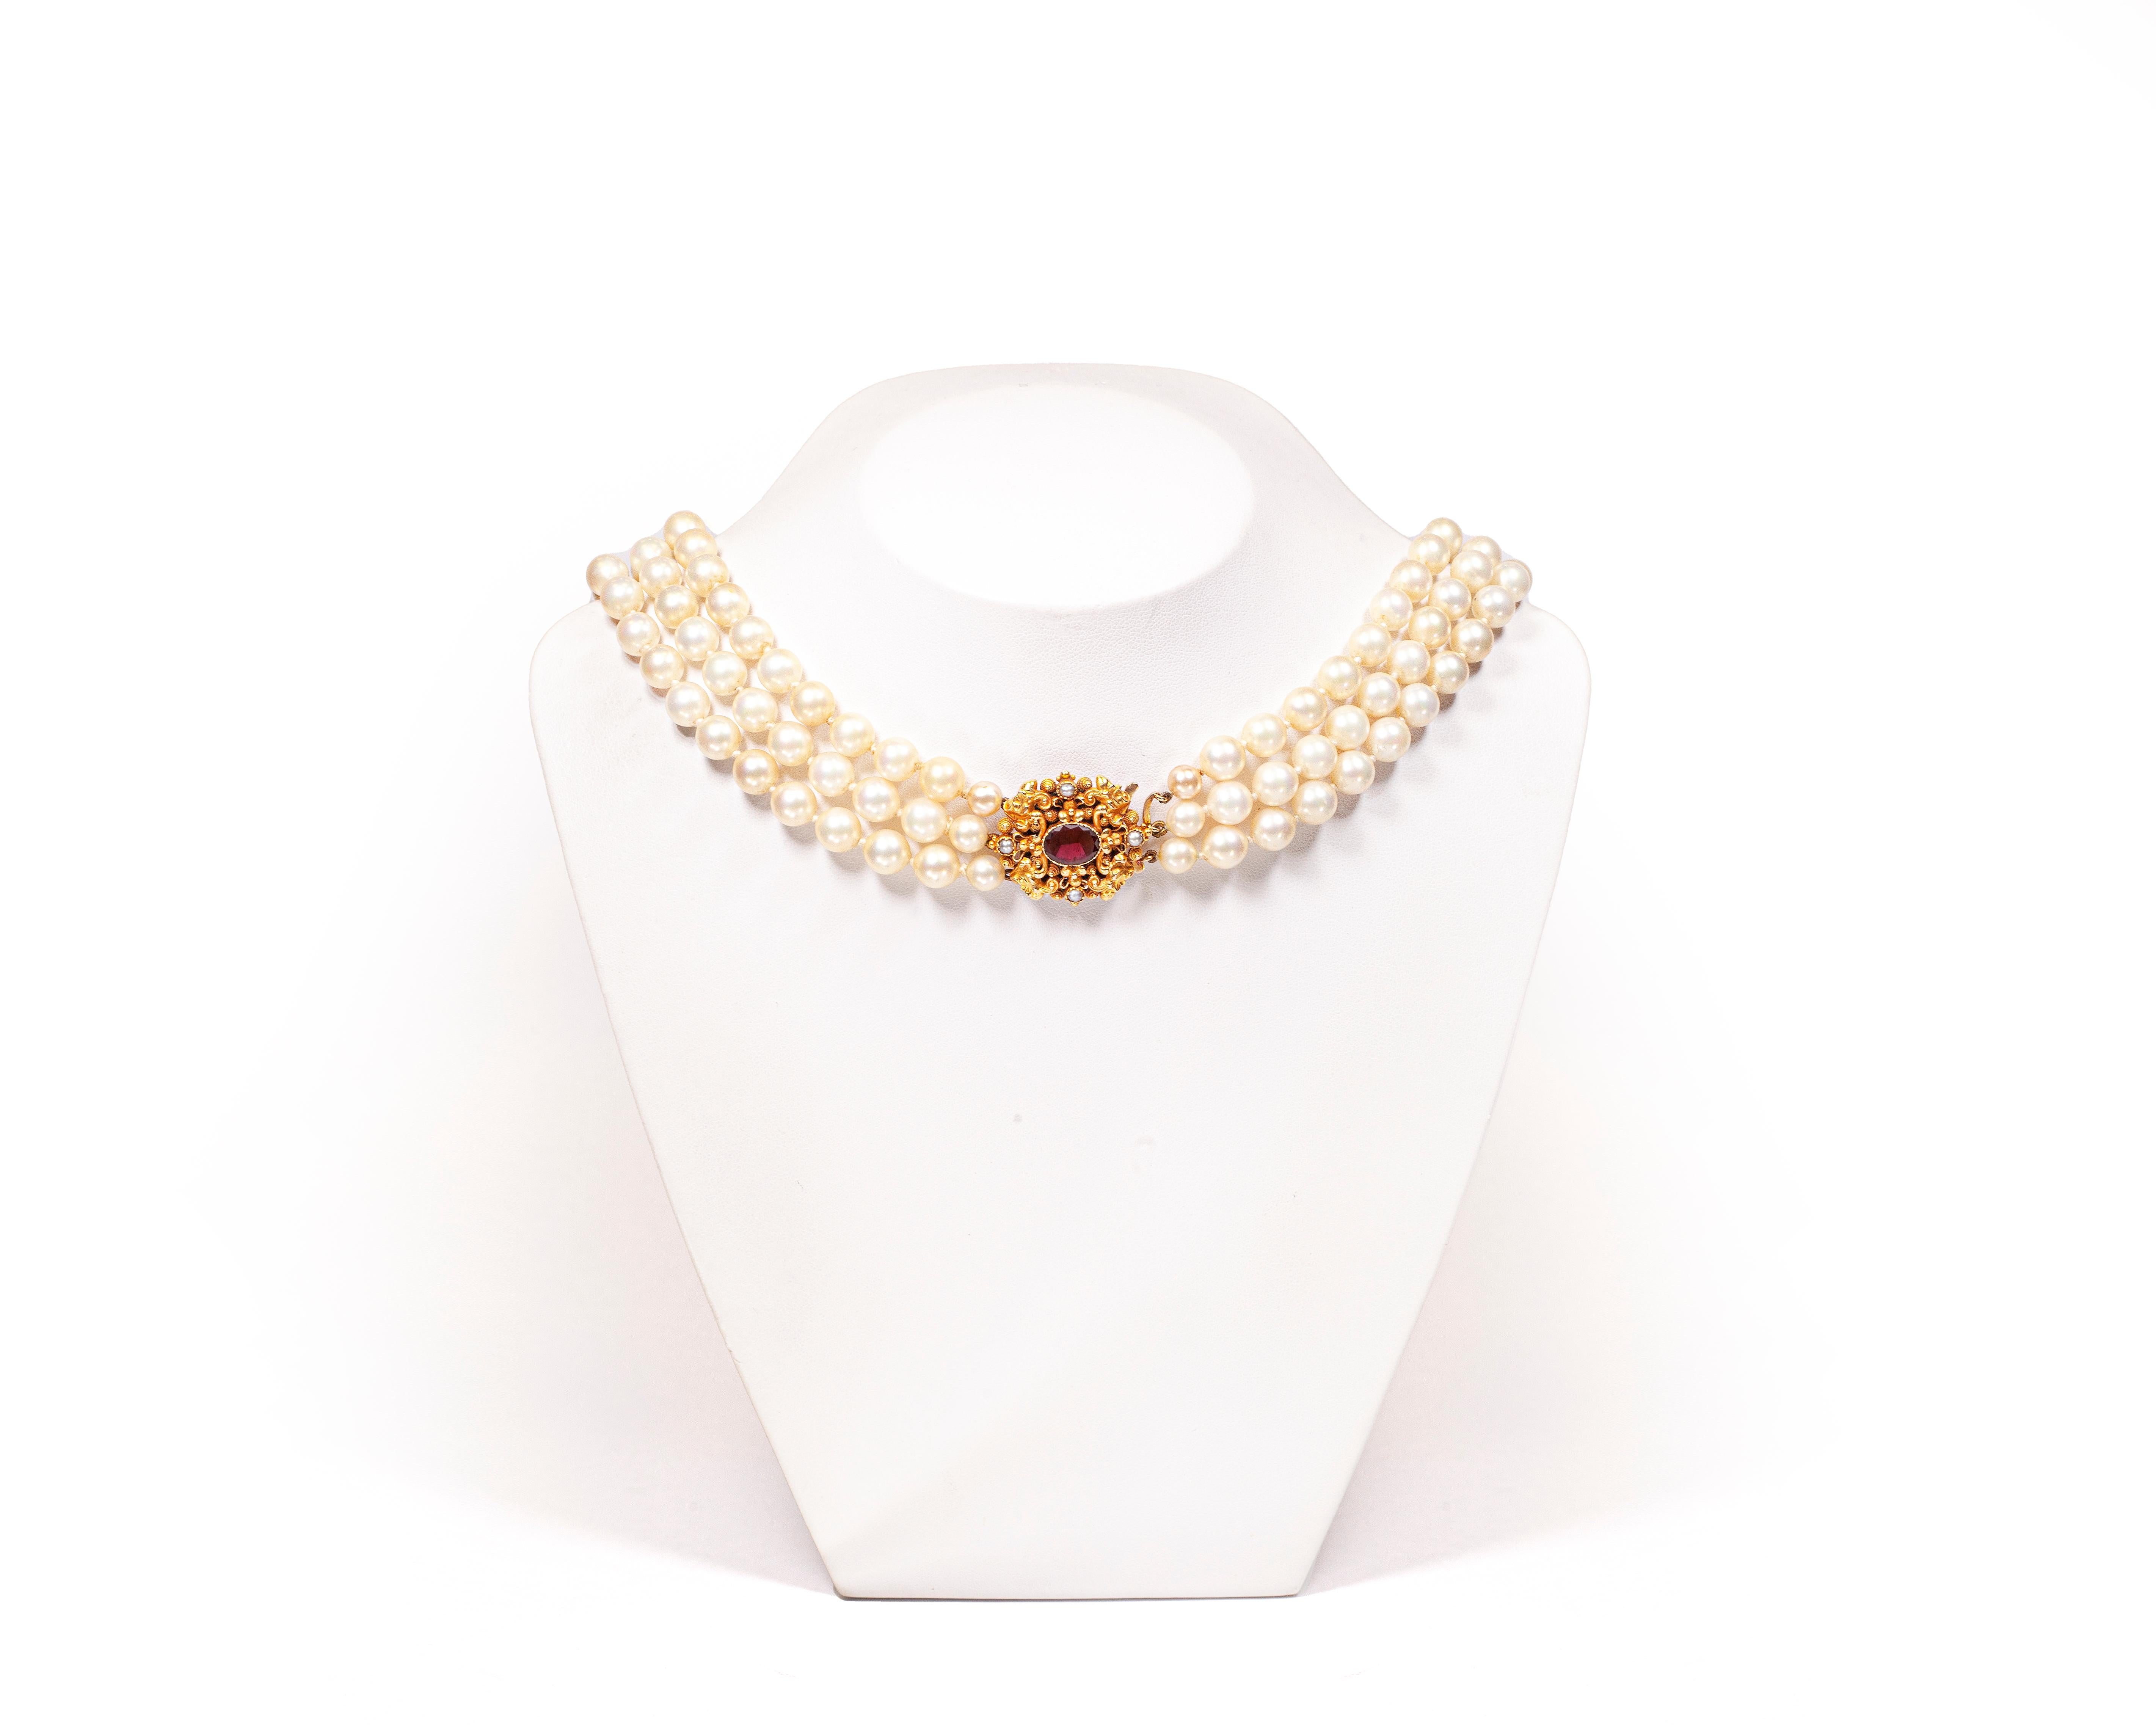 Pearls, a symbol of loyalty and purity, are expertly intertwined with the rich and royal hue of 18 carat yellow gold in this breathtaking piece.

This charming beaded necklace features 3 strands of individually knotted Japanese cultured pearls with